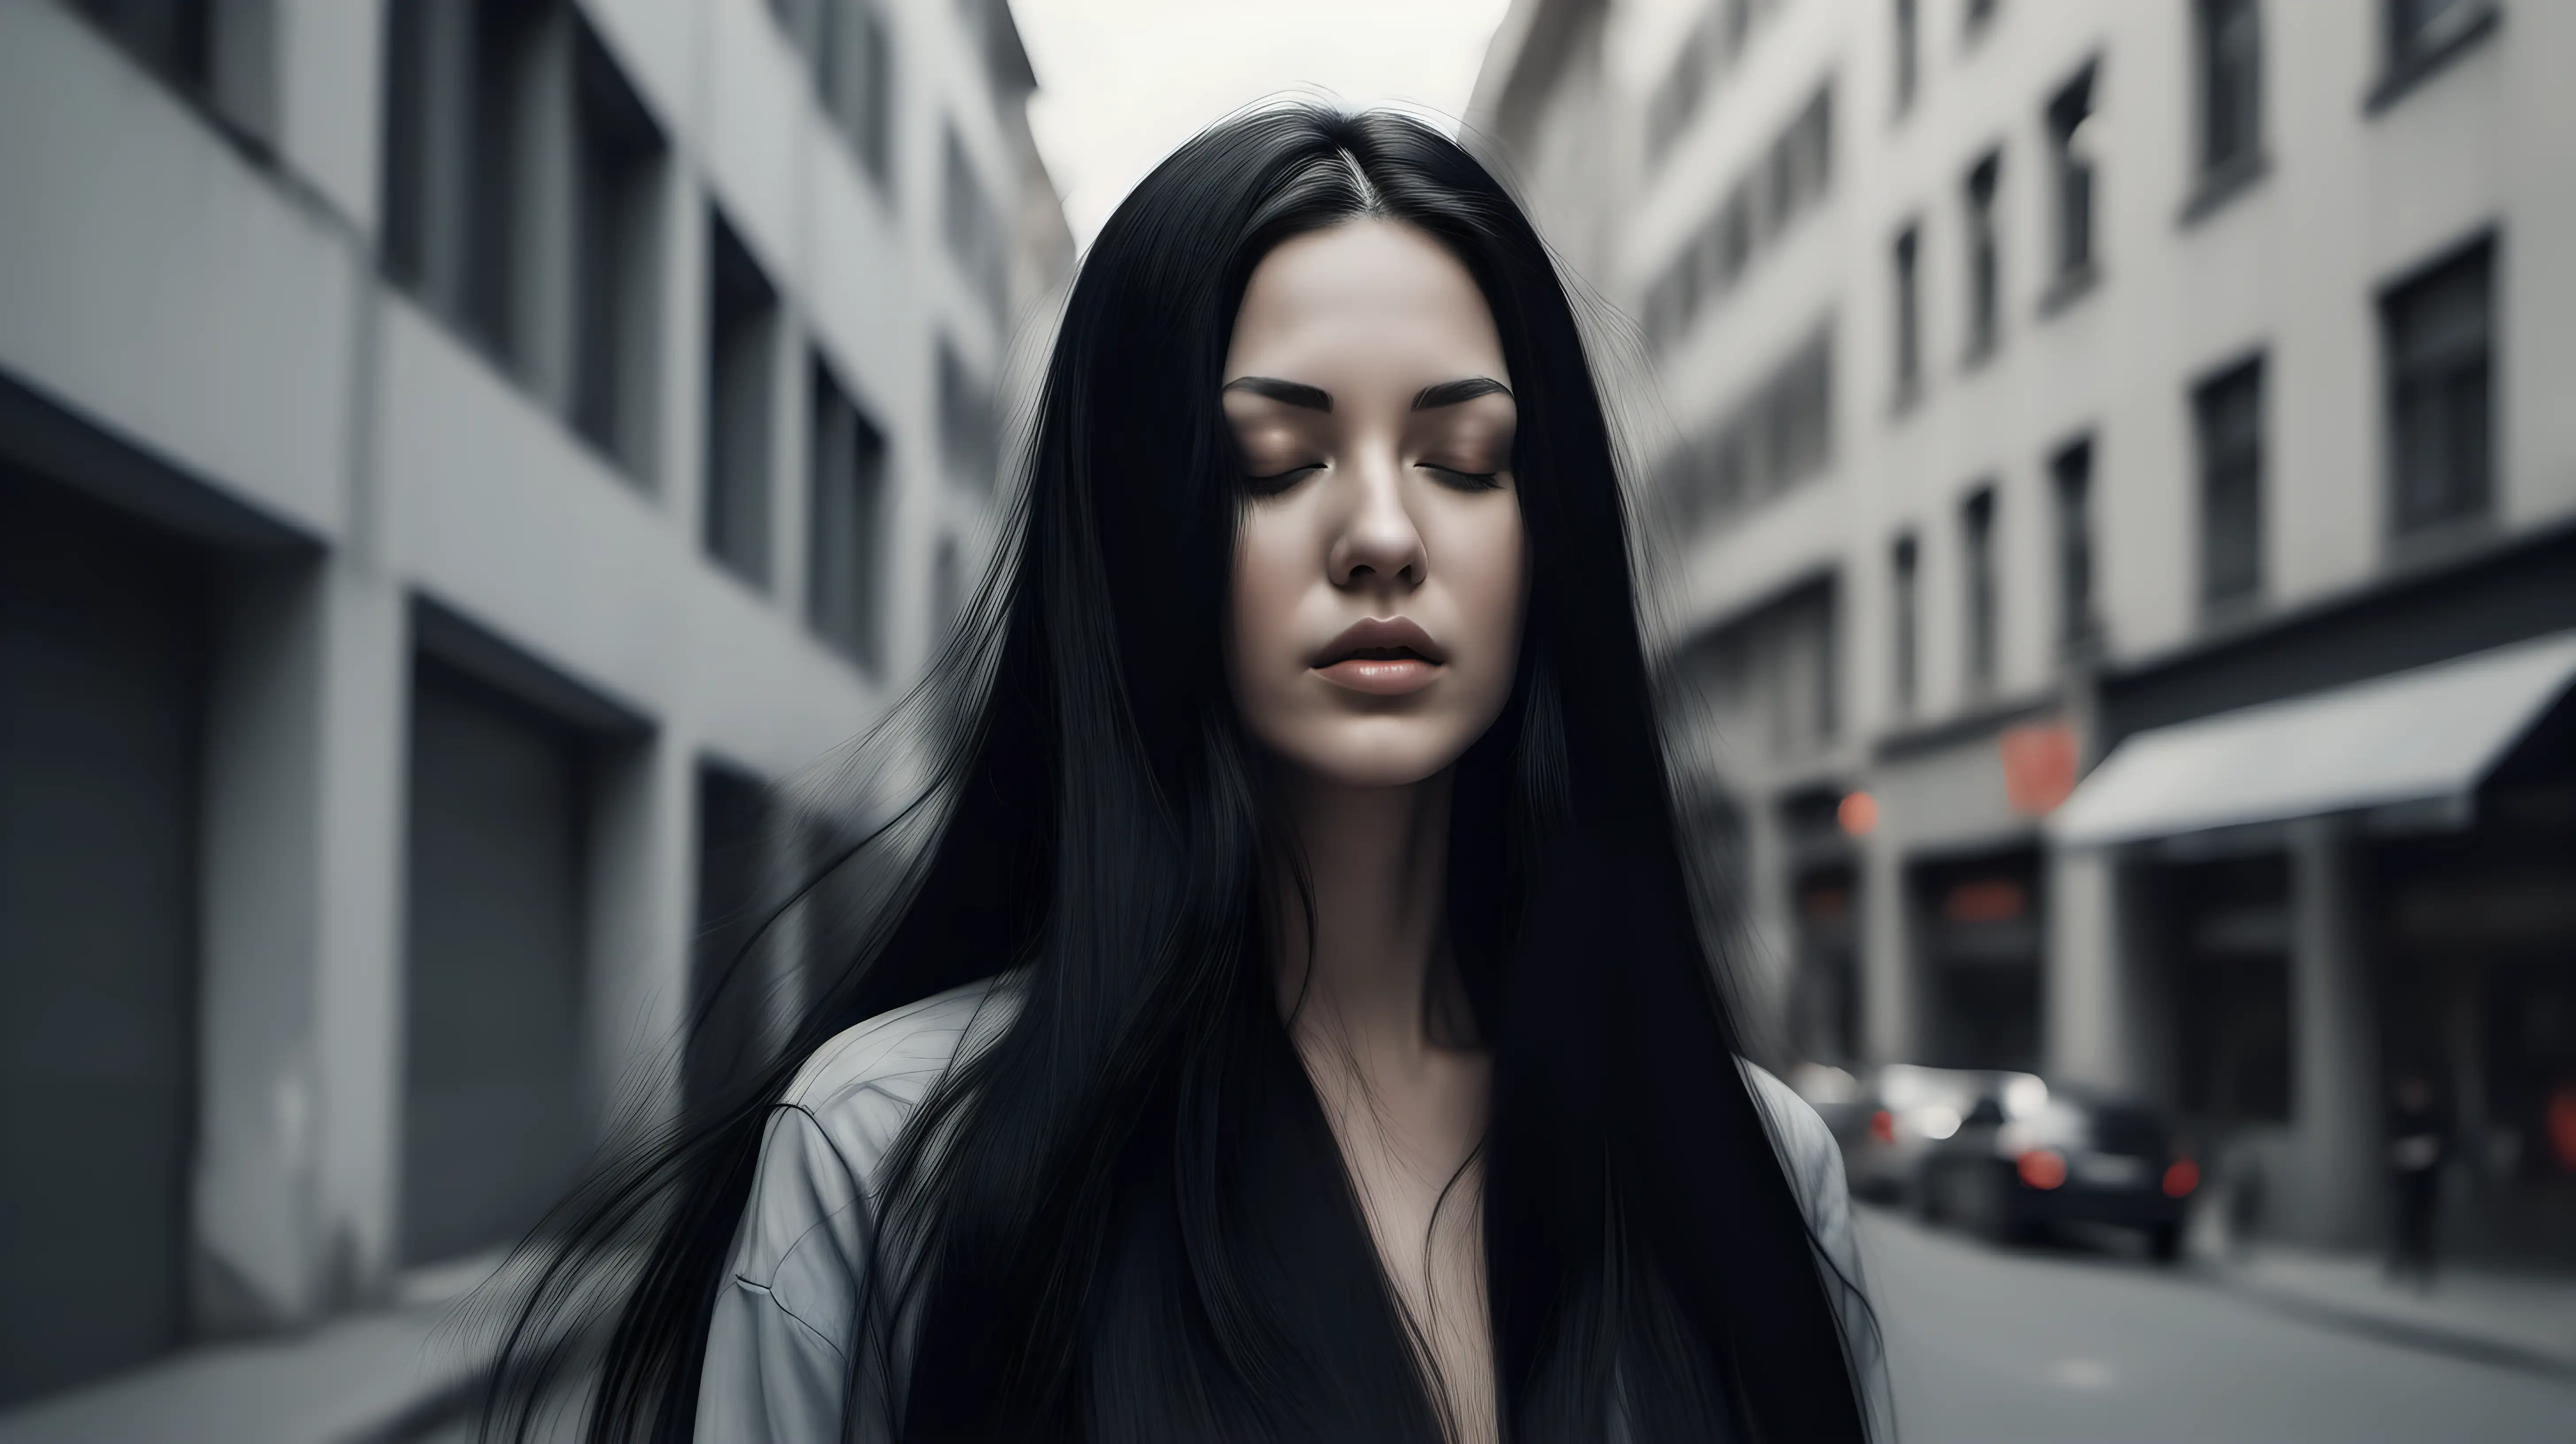 ultrarealistic portrait standing in large urban  street women  caucasic closed eyes with long black hair